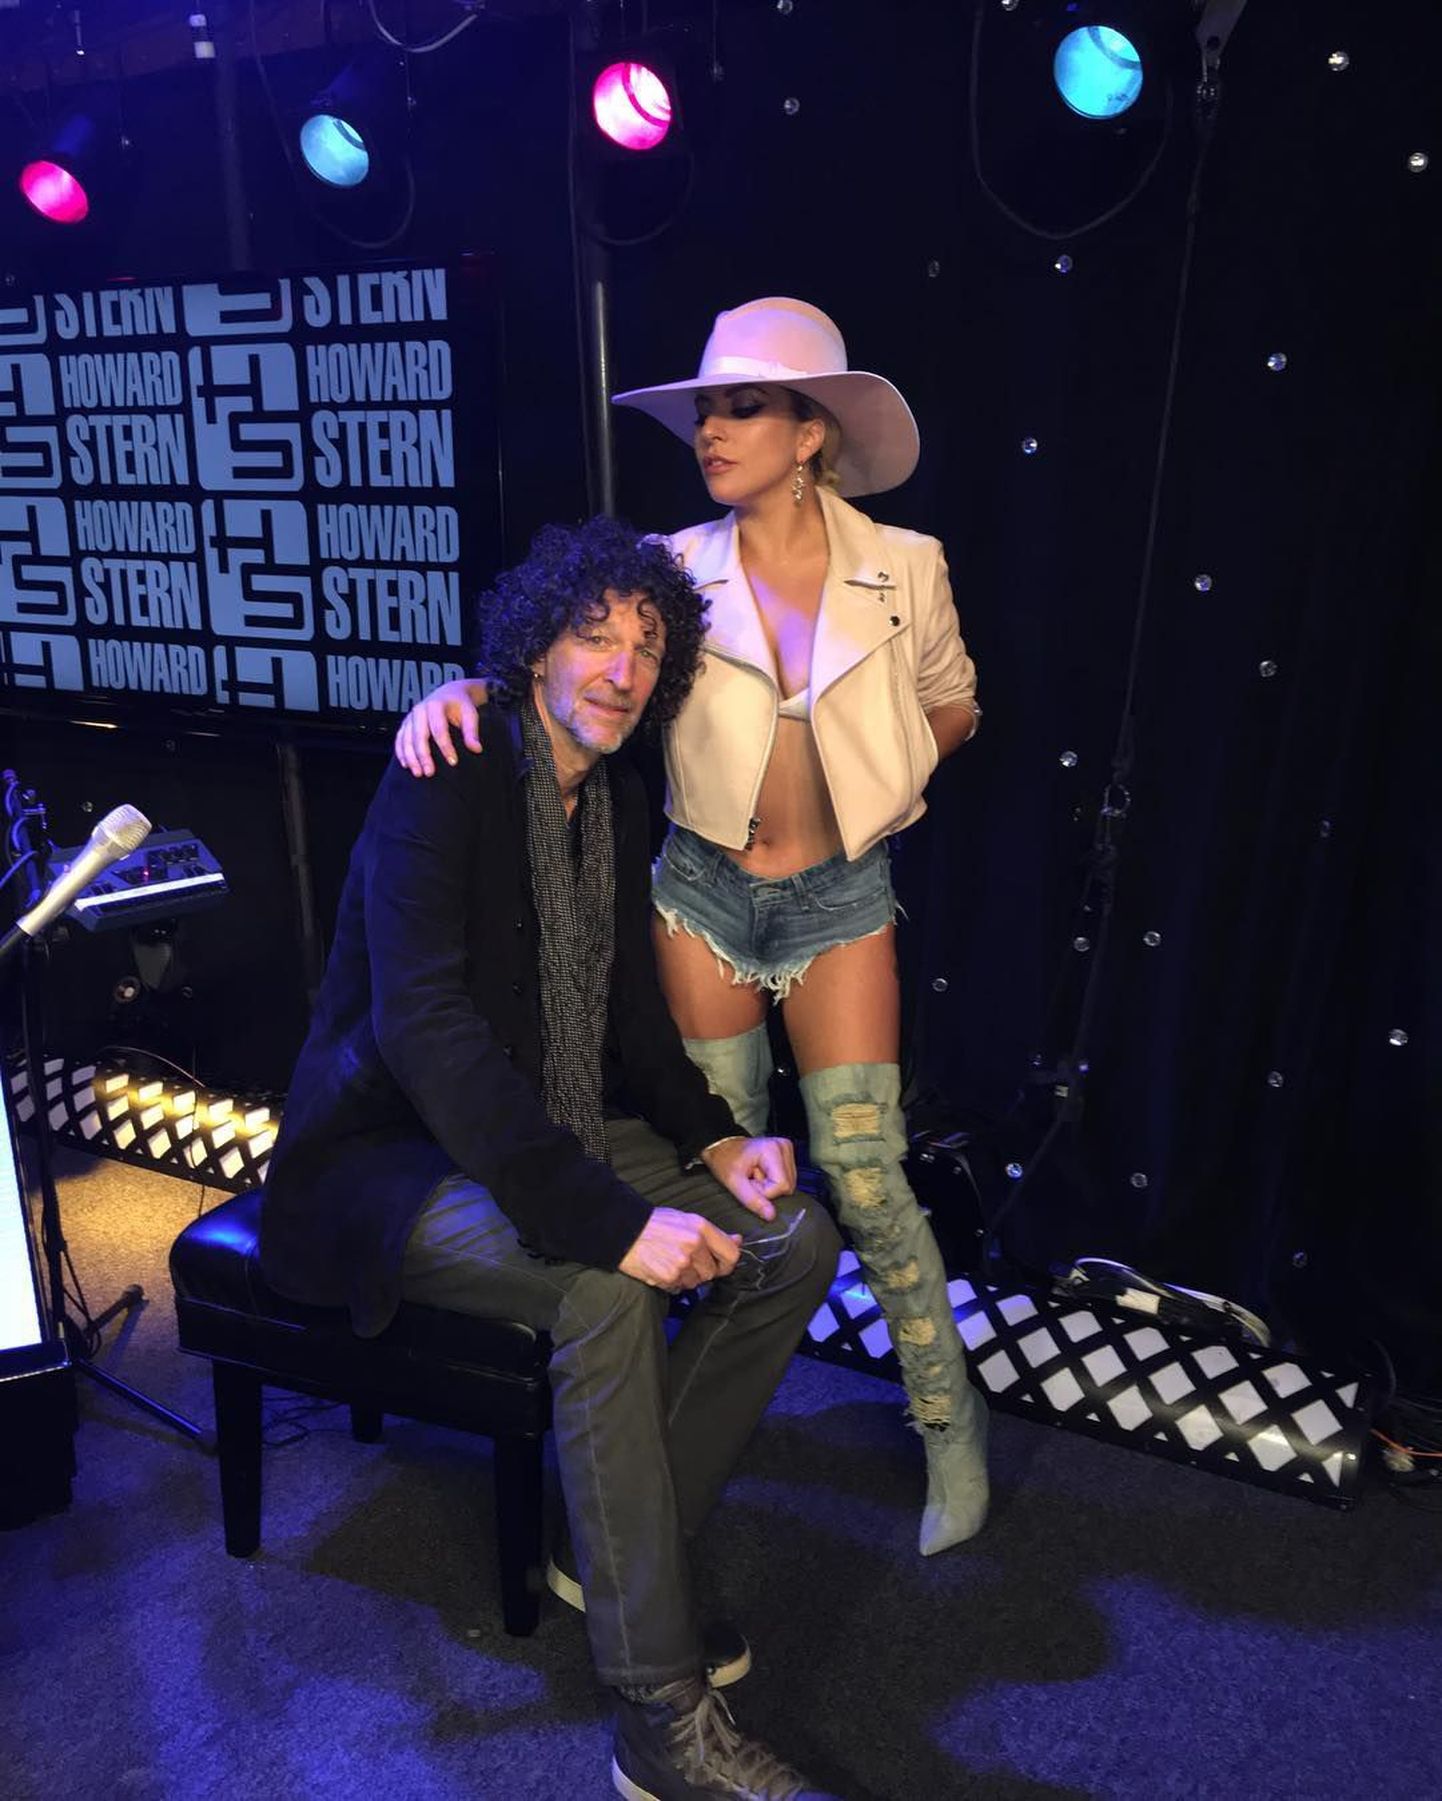 Lady Gaga releases a photo on Instagram with the following caption: "You're the best Howard. #JOANNE Just did a live performance of Million Reasons @sternshow". Photo Credit: Instagram *** No USA Distribution *** For Editorial Use Only *** Not to be Published in Books or Photo Books ***  Please note: Fees charged by the agency are for the agency